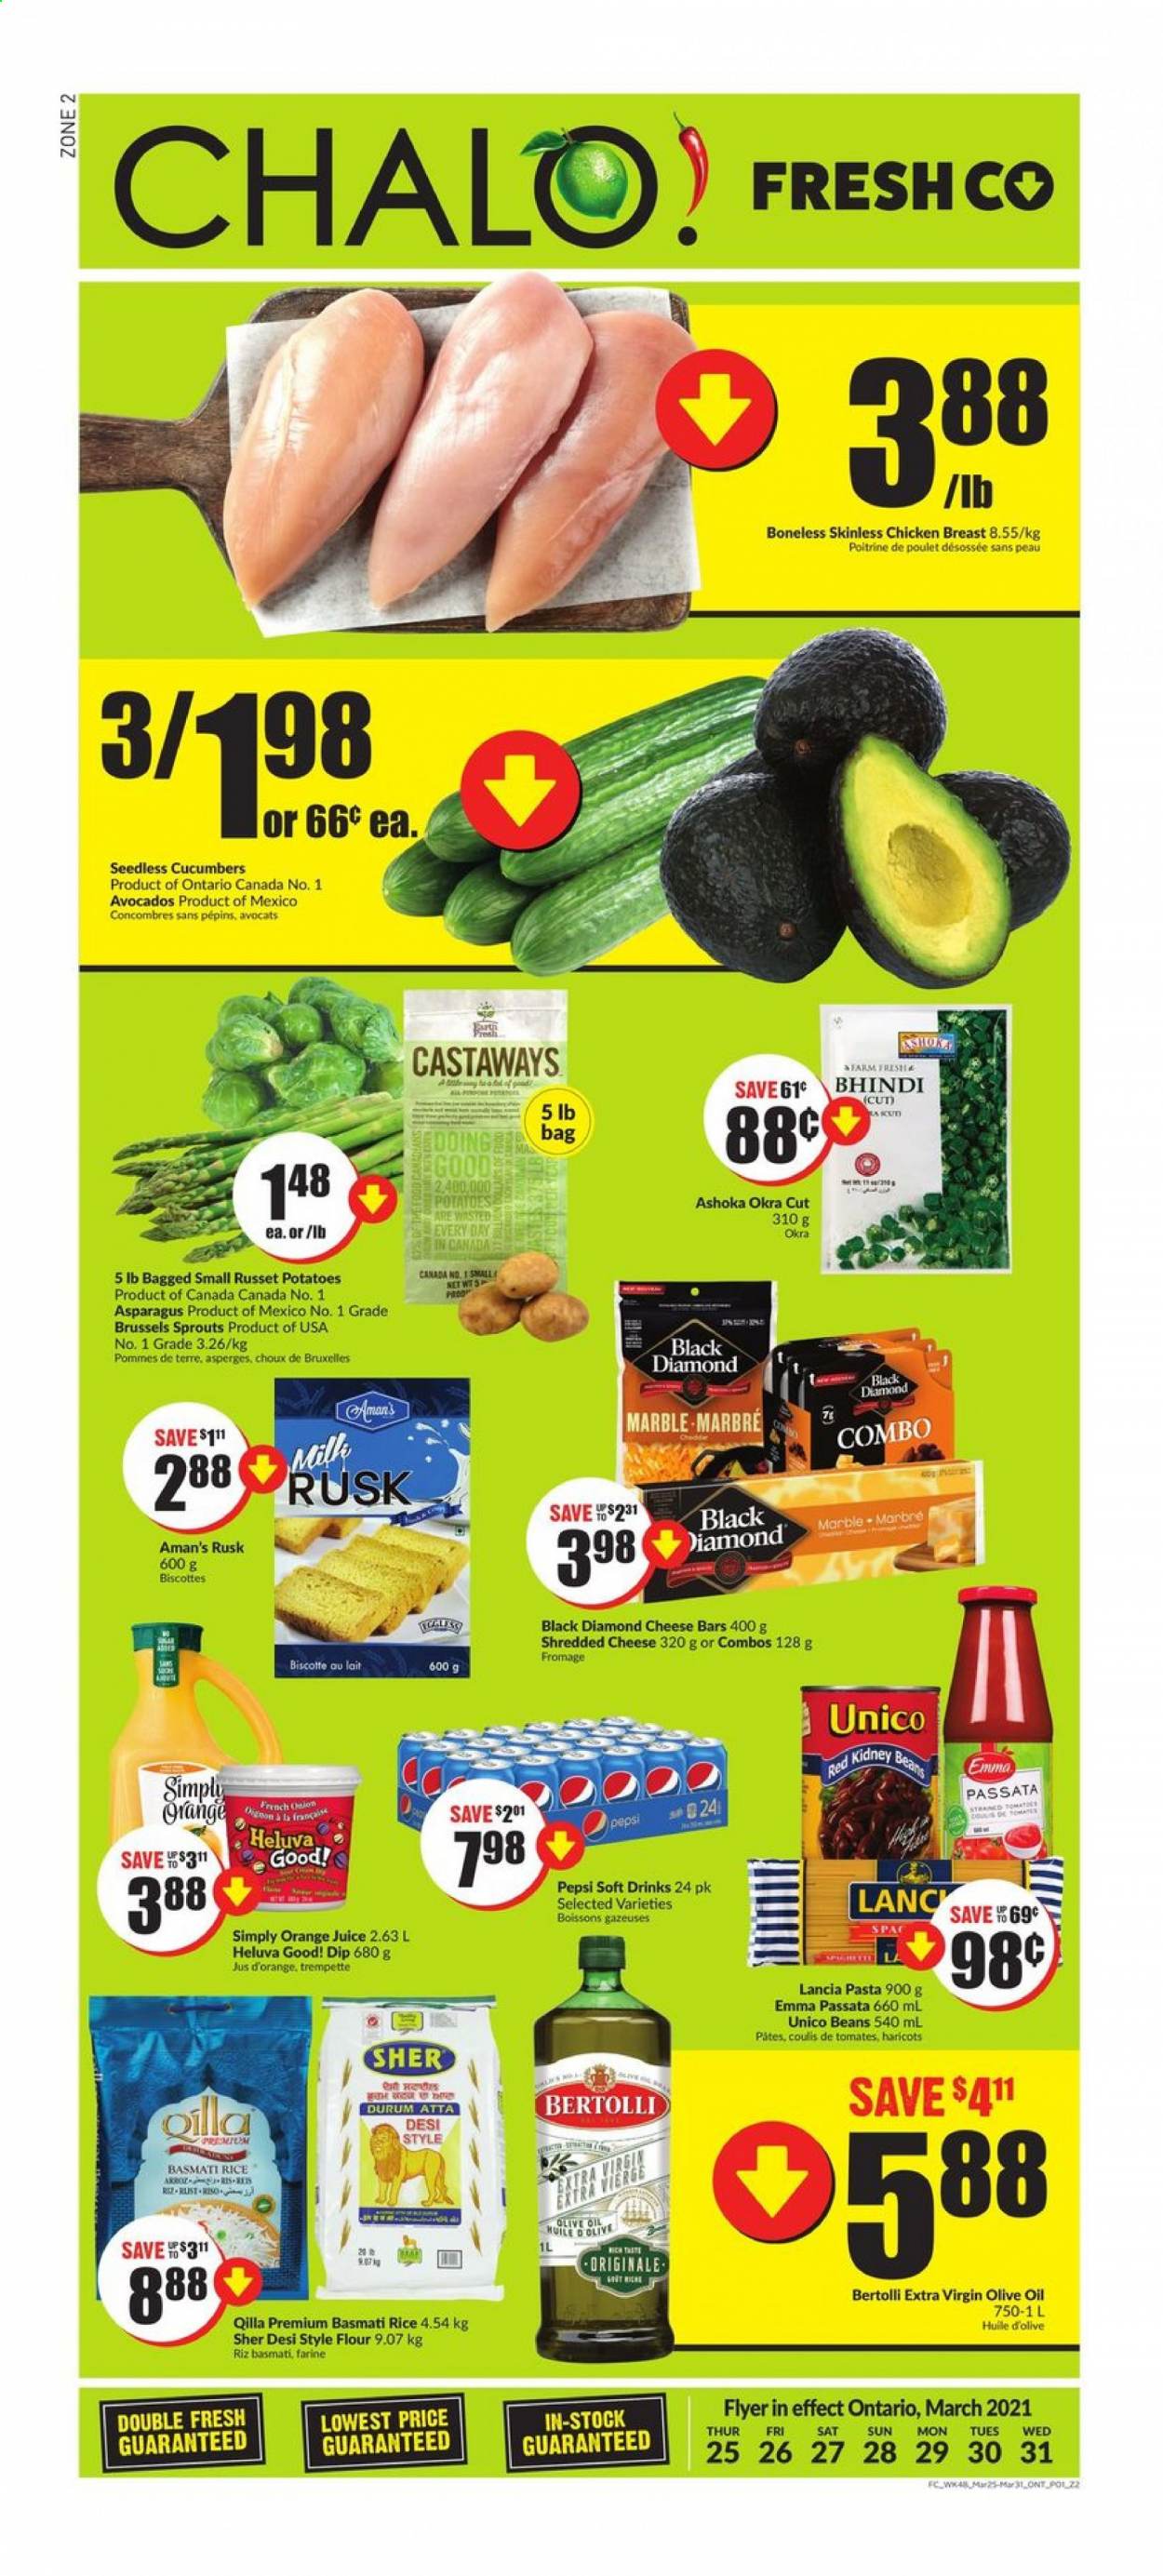 thumbnail - Chalo! FreshCo. Flyer - March 25, 2021 - March 31, 2021 - Sales products - rusks, asparagus, beans, cucumber, russet potatoes, potatoes, okra, brussel sprouts, avocado, pasta, Bertolli, shredded cheese, milk, dip, flour, kidney beans, basmati rice, rice, extra virgin olive oil, olive oil, oil, Pepsi, orange juice, juice, soft drink, chicken breasts, chicken. Page 1.